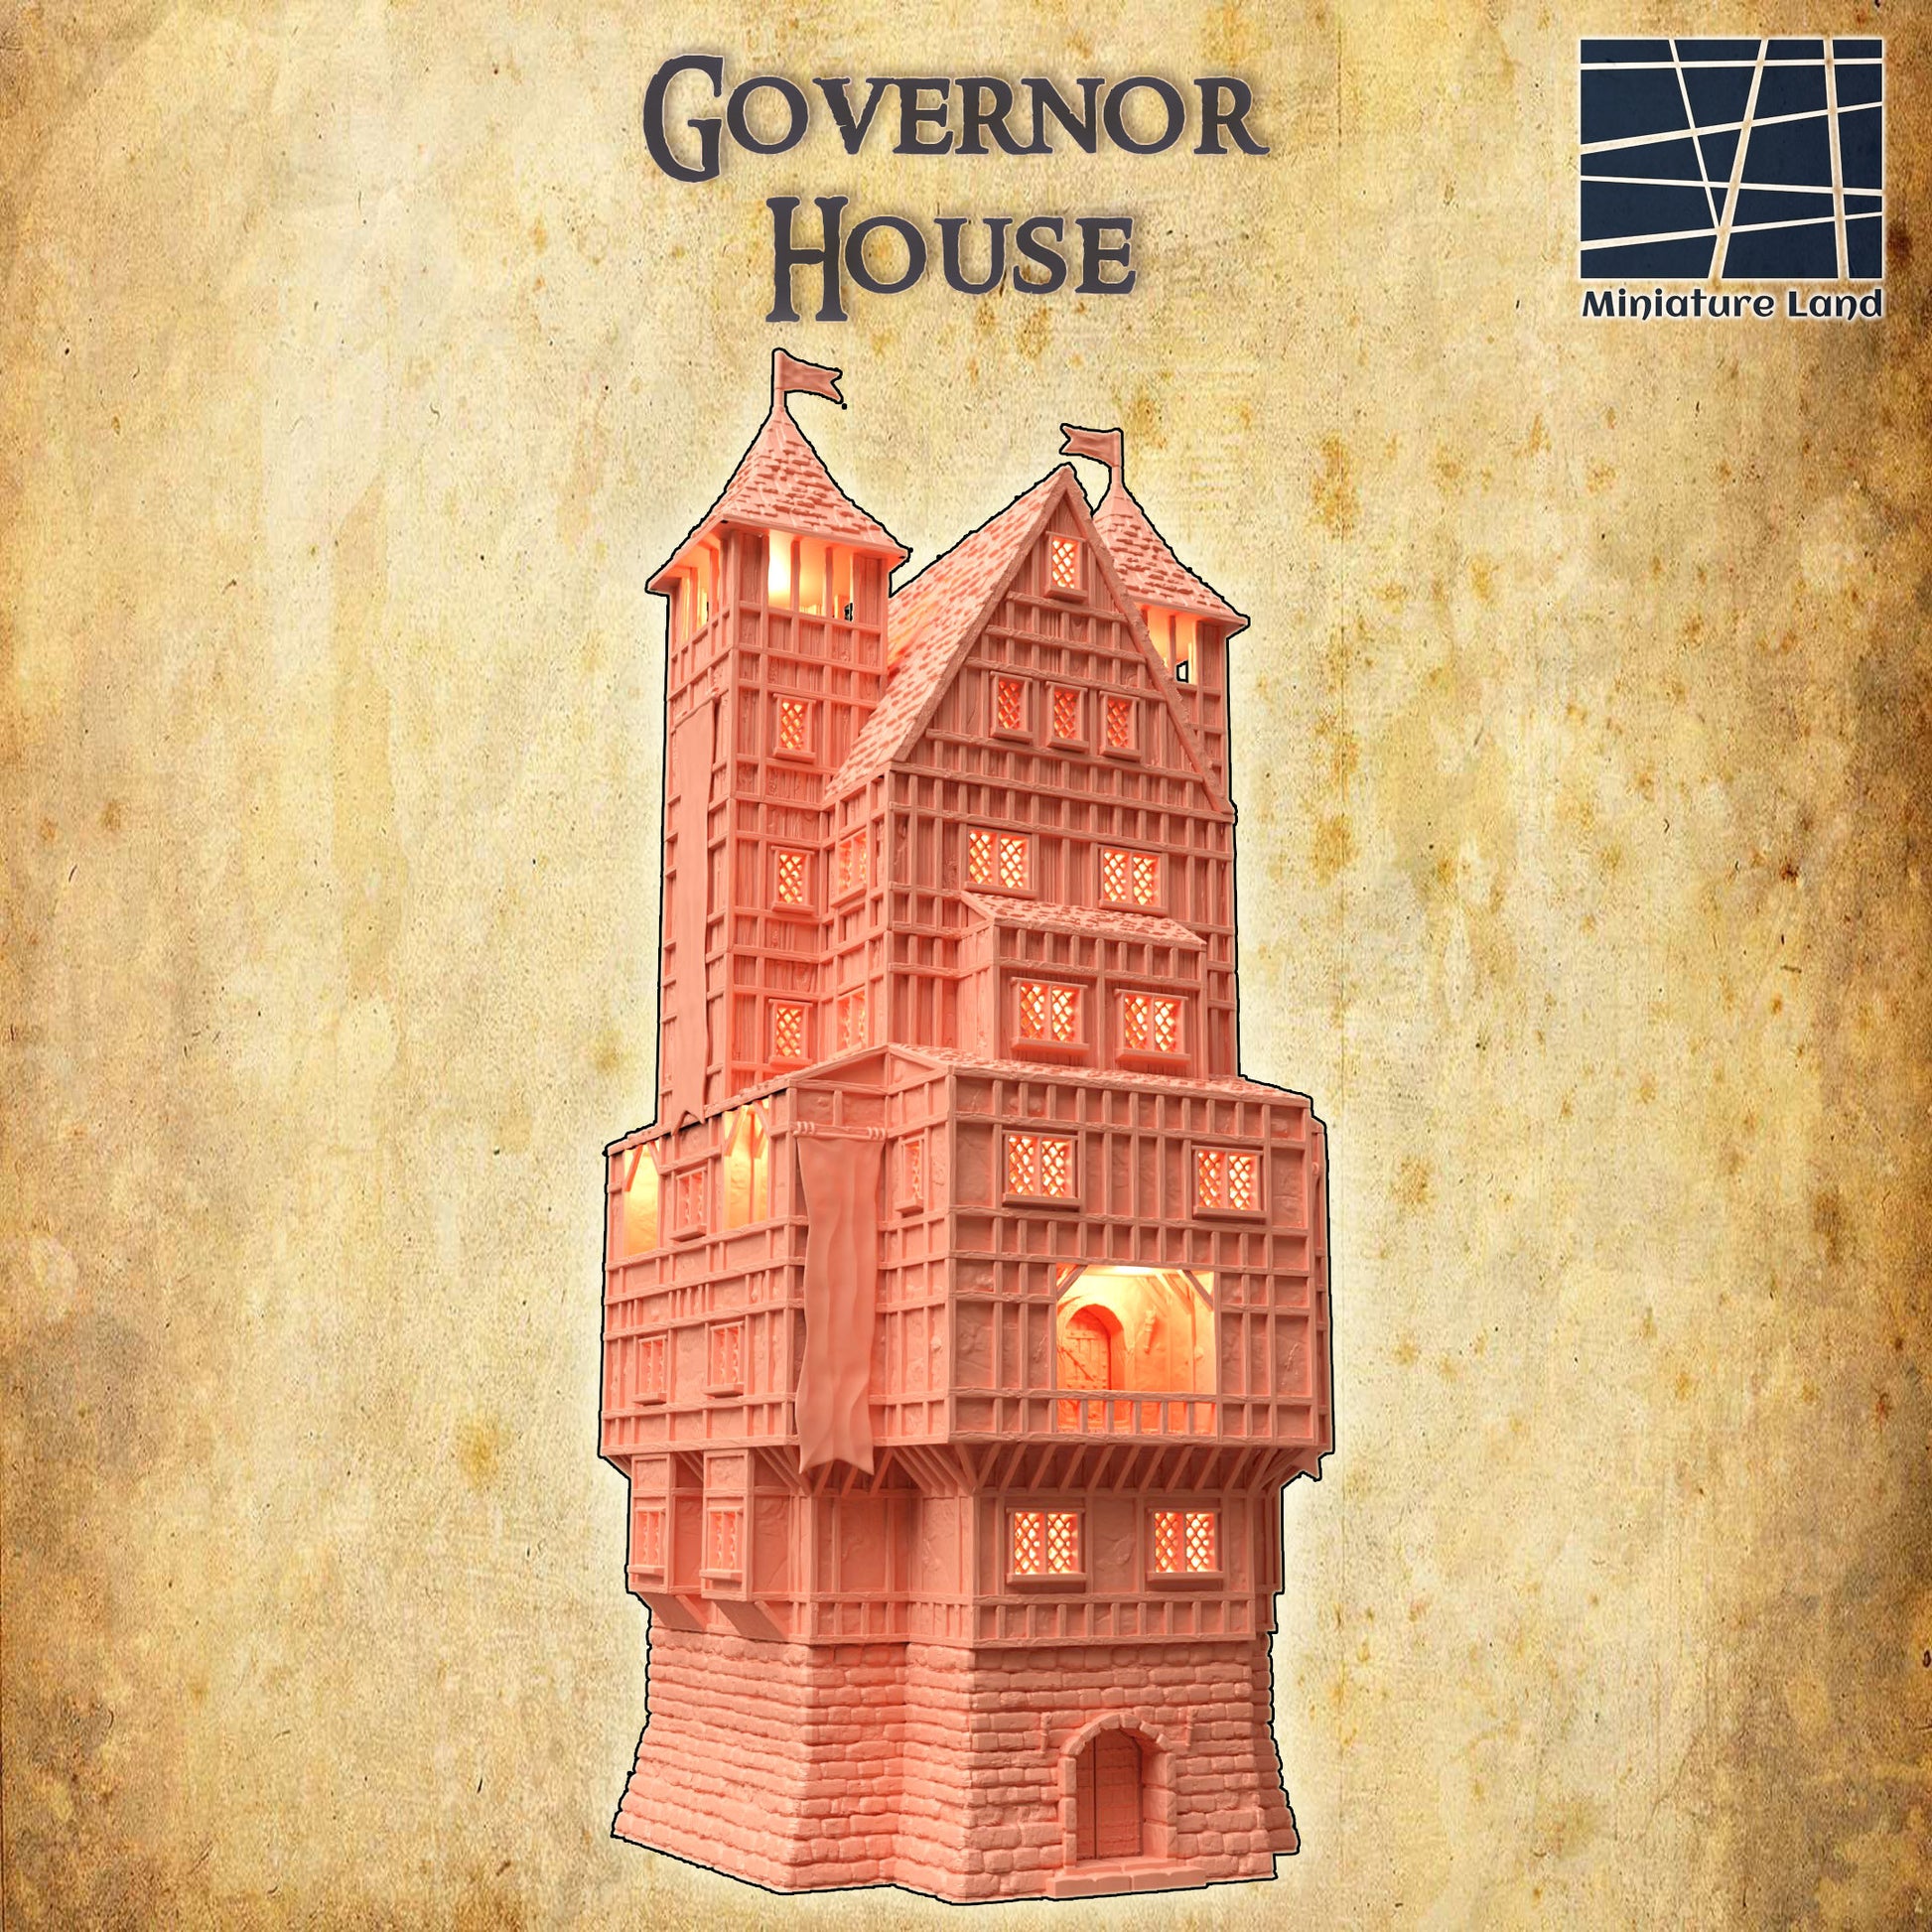 Governor House City Building Mansion High Rise building 7 Stories,City Terrain